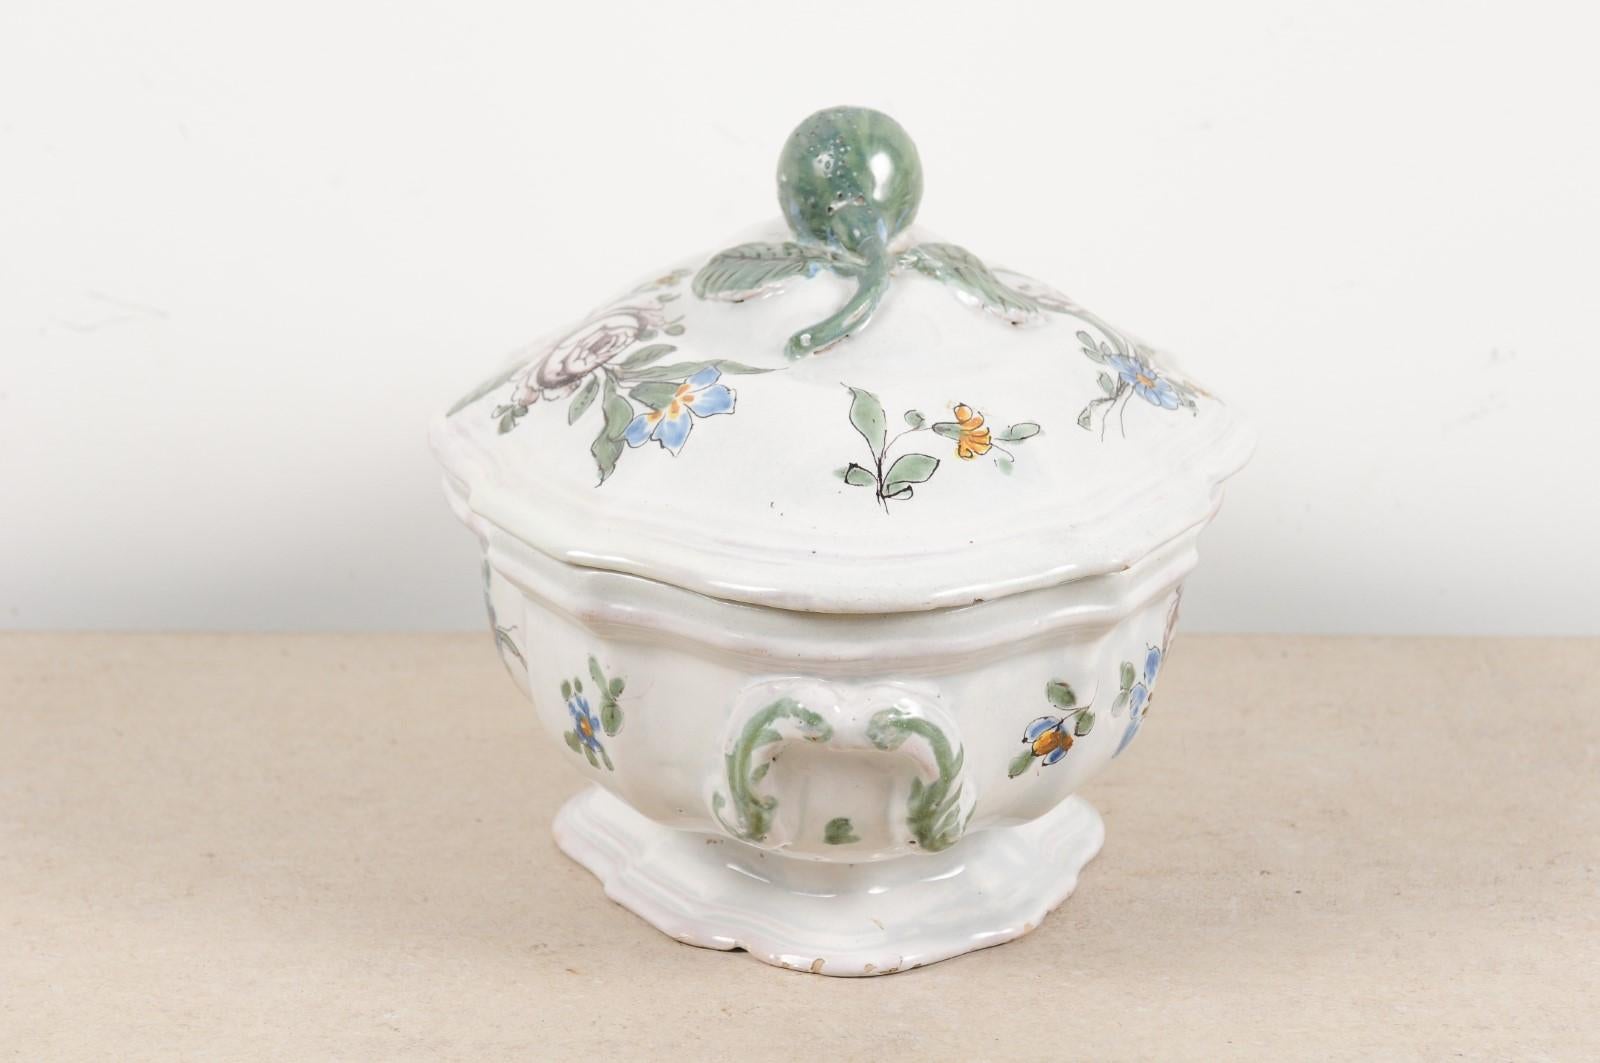 French 1750s Faience Oval Shaped Soup Tureen from Bordeaux with Floral Decor For Sale 3